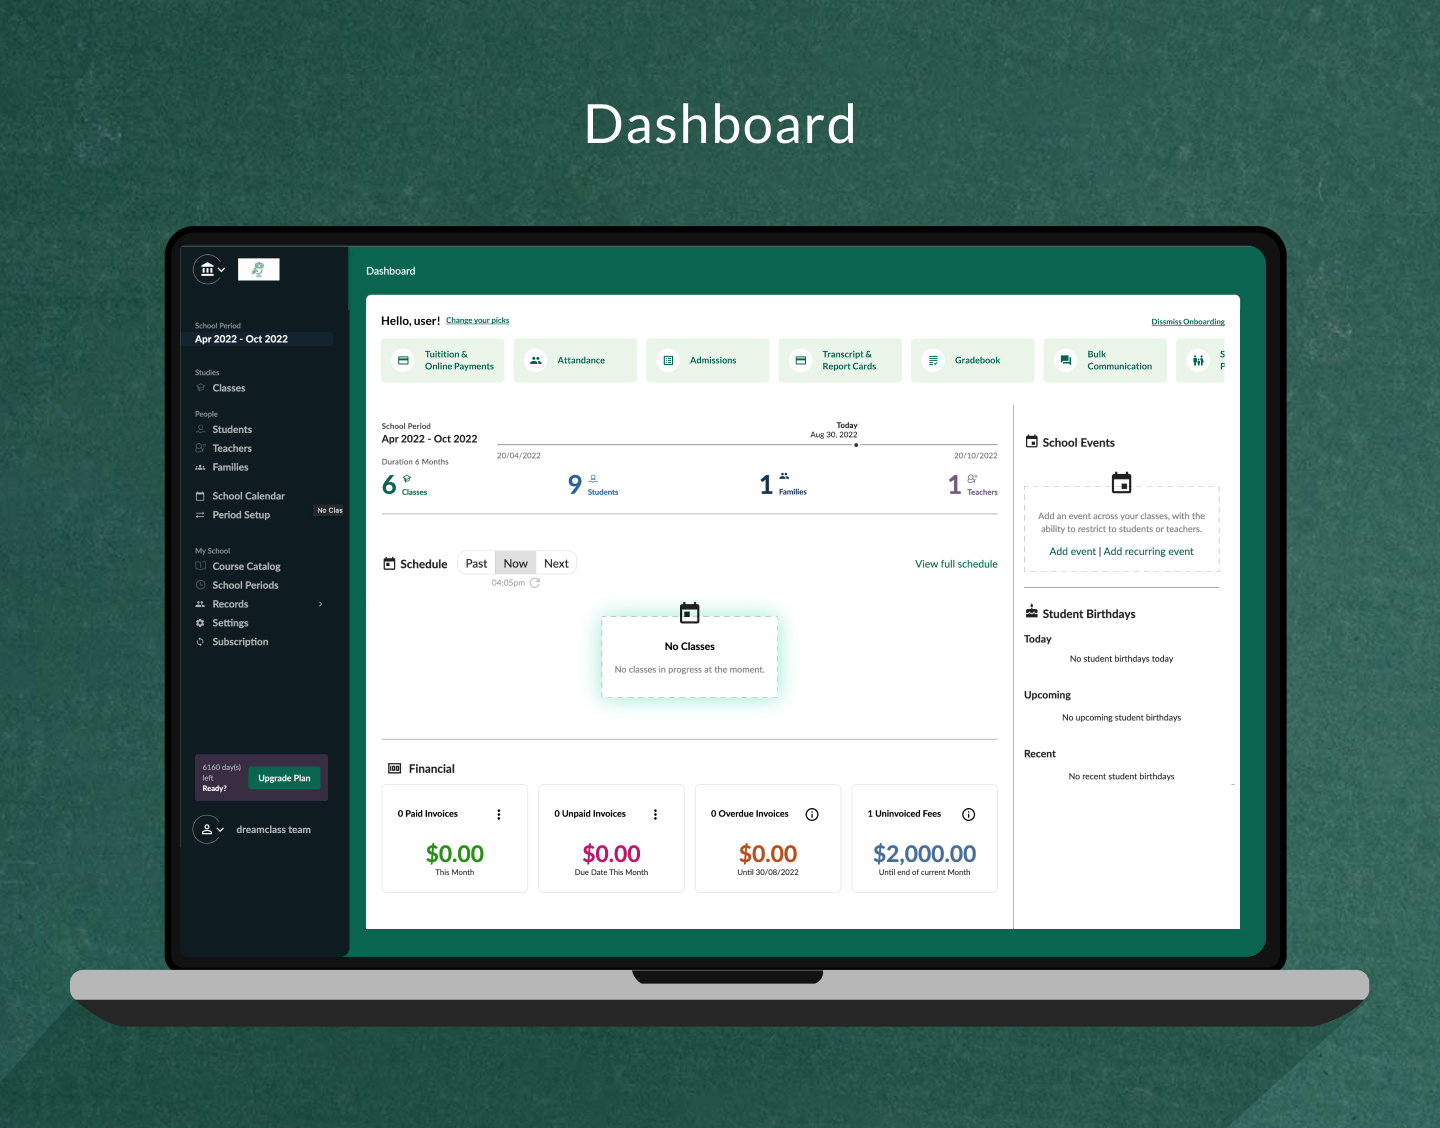 Manage your school easily with powerful dashboards that give you dynamic insights on the most important resources of your school.